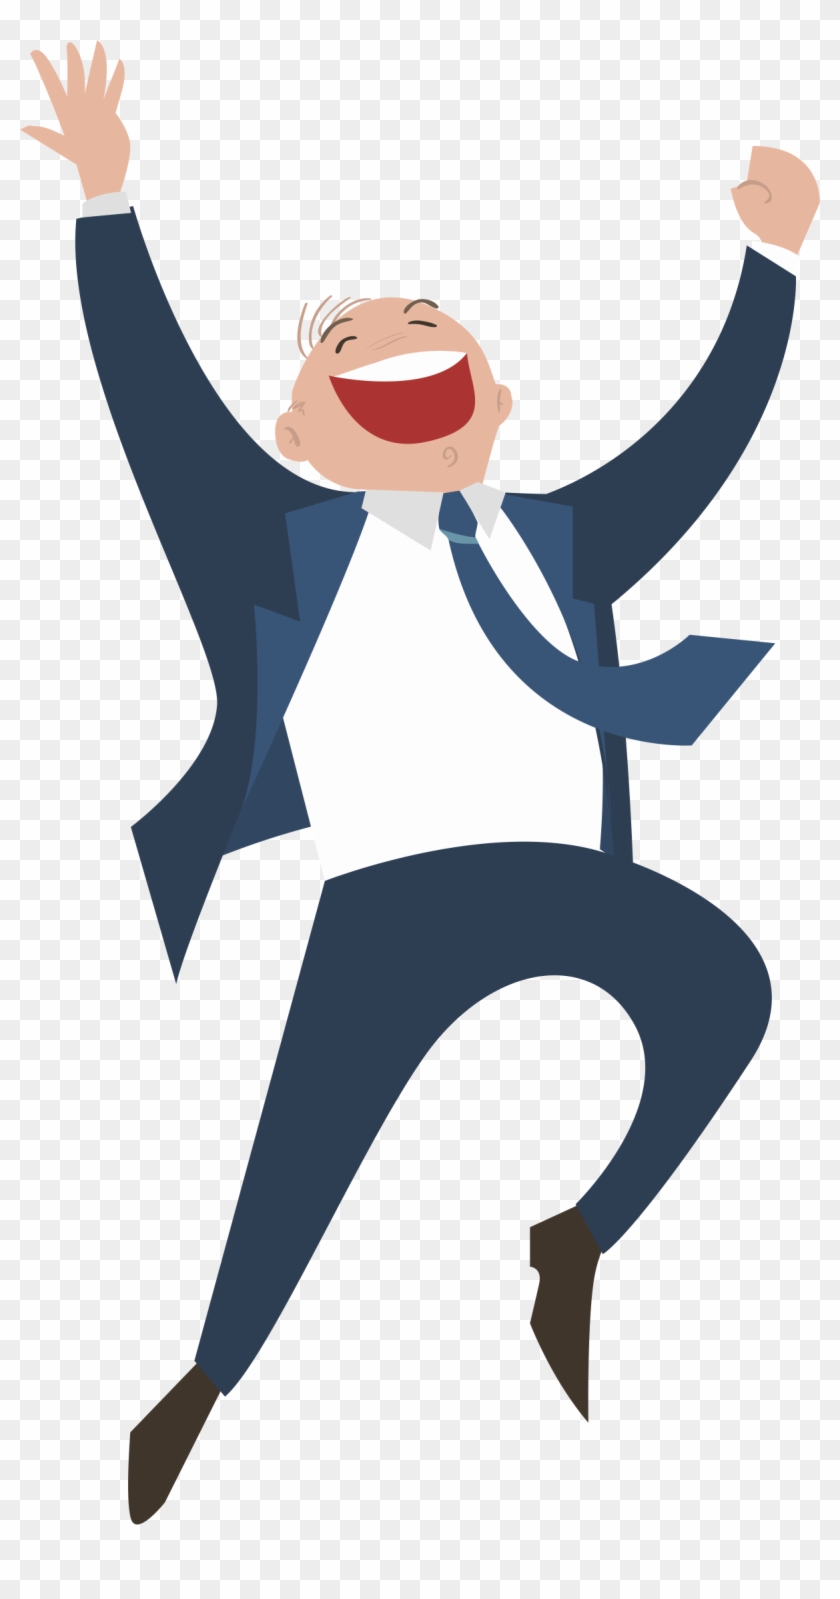 Happiness Illustration Laughing Man Happy Person Vector Png Free Transparent Png Clipart Images Download